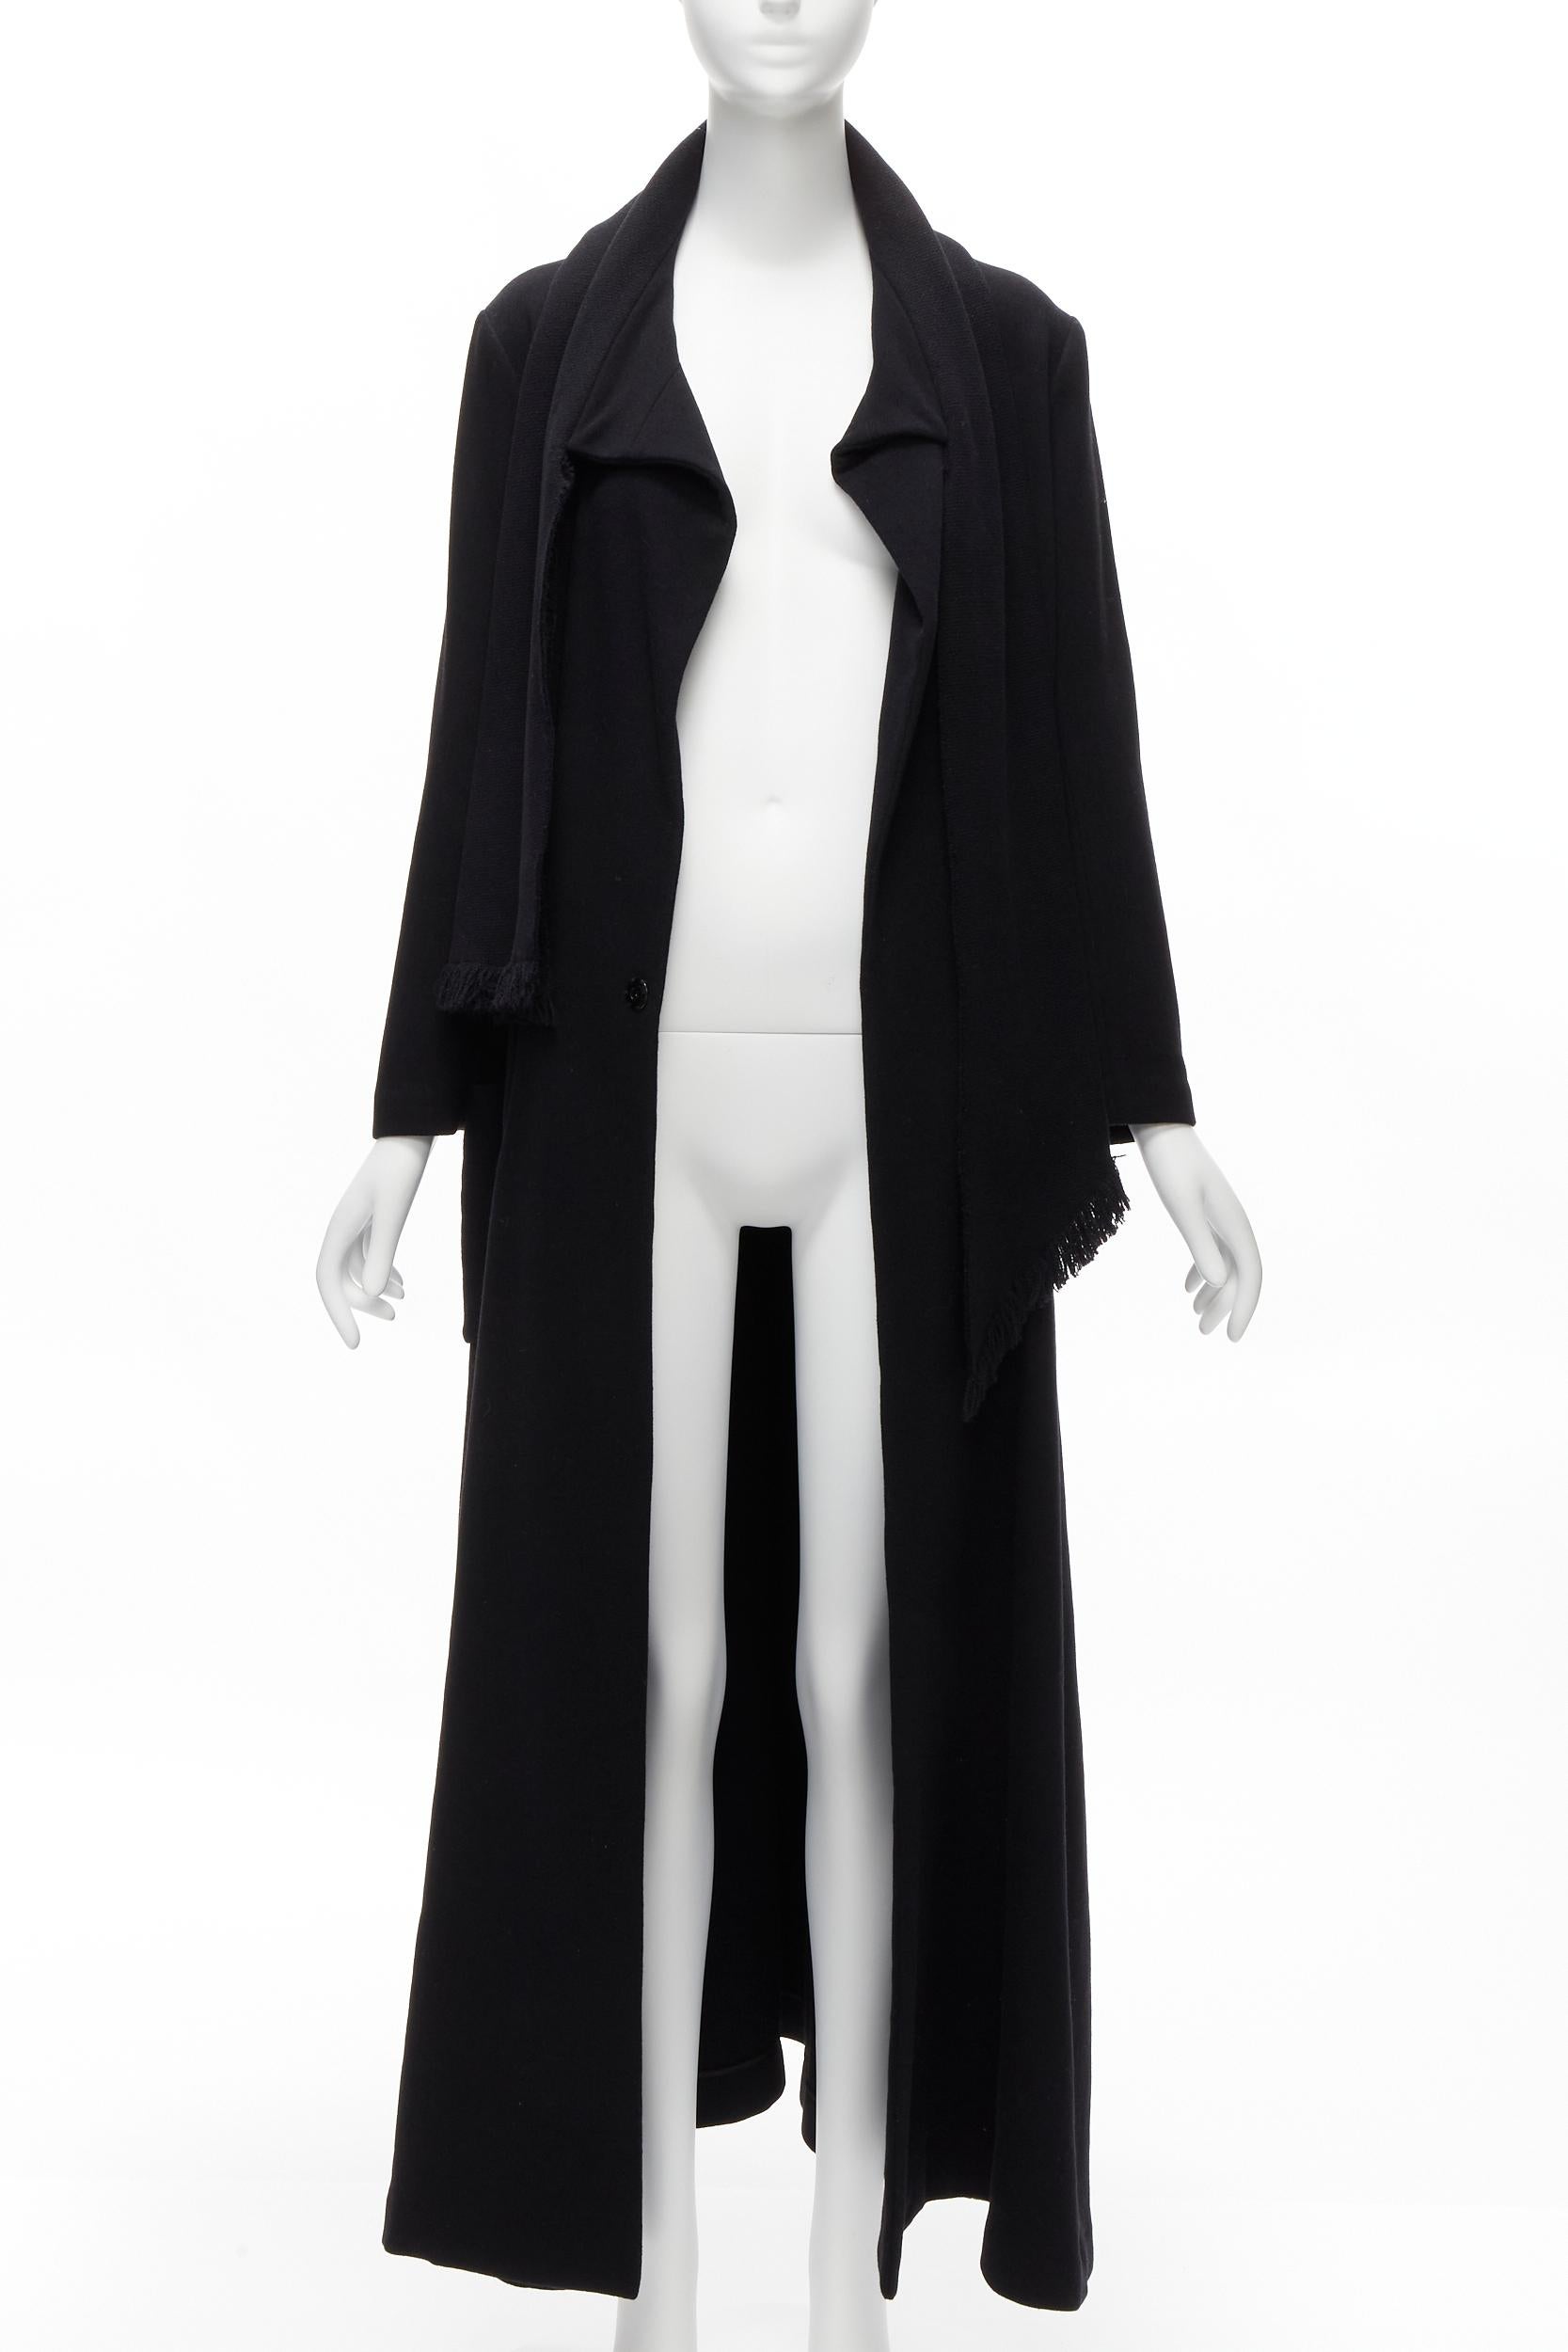 YOHJI YAMAMOTO black wool blend wrap scarf multi pockets longline coat JP2 M
Reference: TGAS/D00293
Brand: Yohji Yamamoto
Designer: Yohji Yamamoto
Material: Wool, Nylon
Color: Black
Pattern: Solid
Closure: Snap Buttons
Extra Details: Very